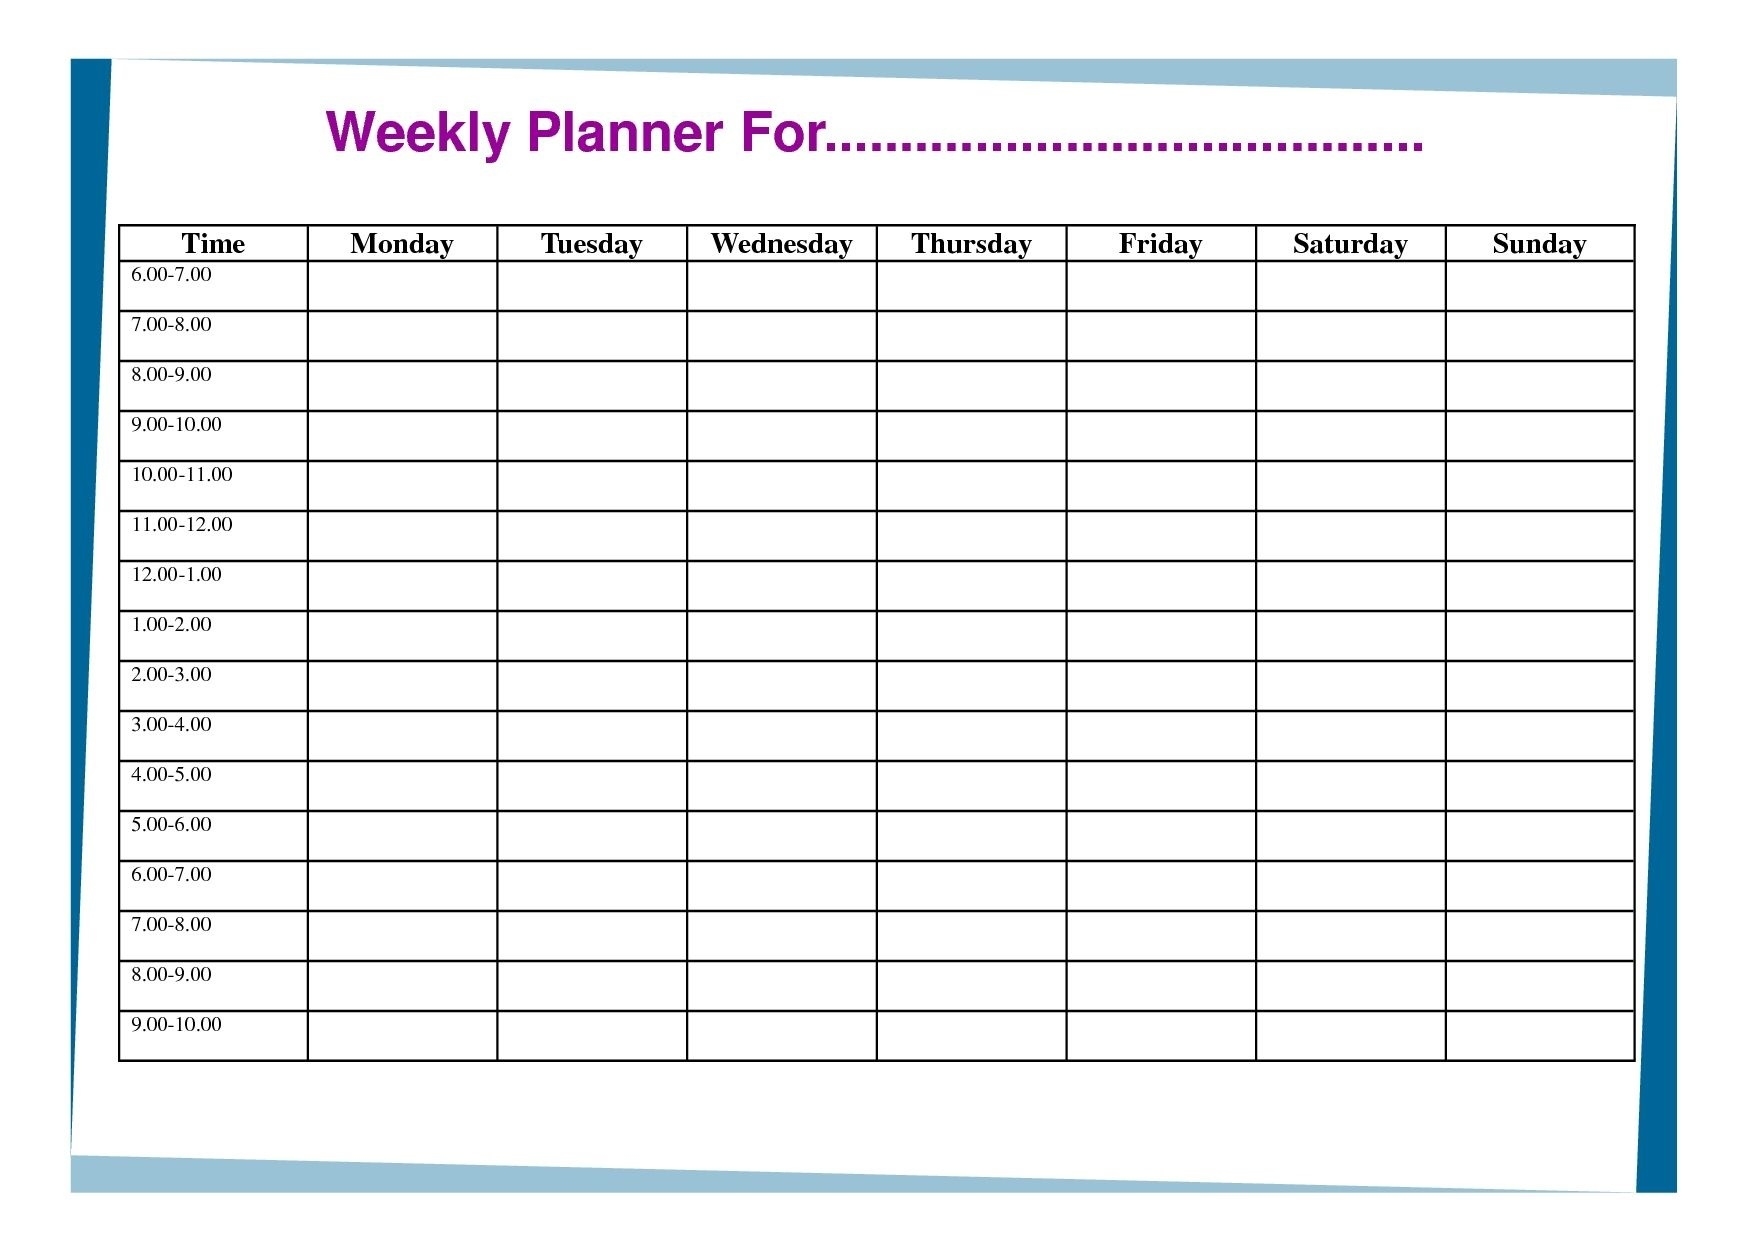 Free Weekly Planner Template | 12 Month Printable Calendar Free 8 Week Calendar Template